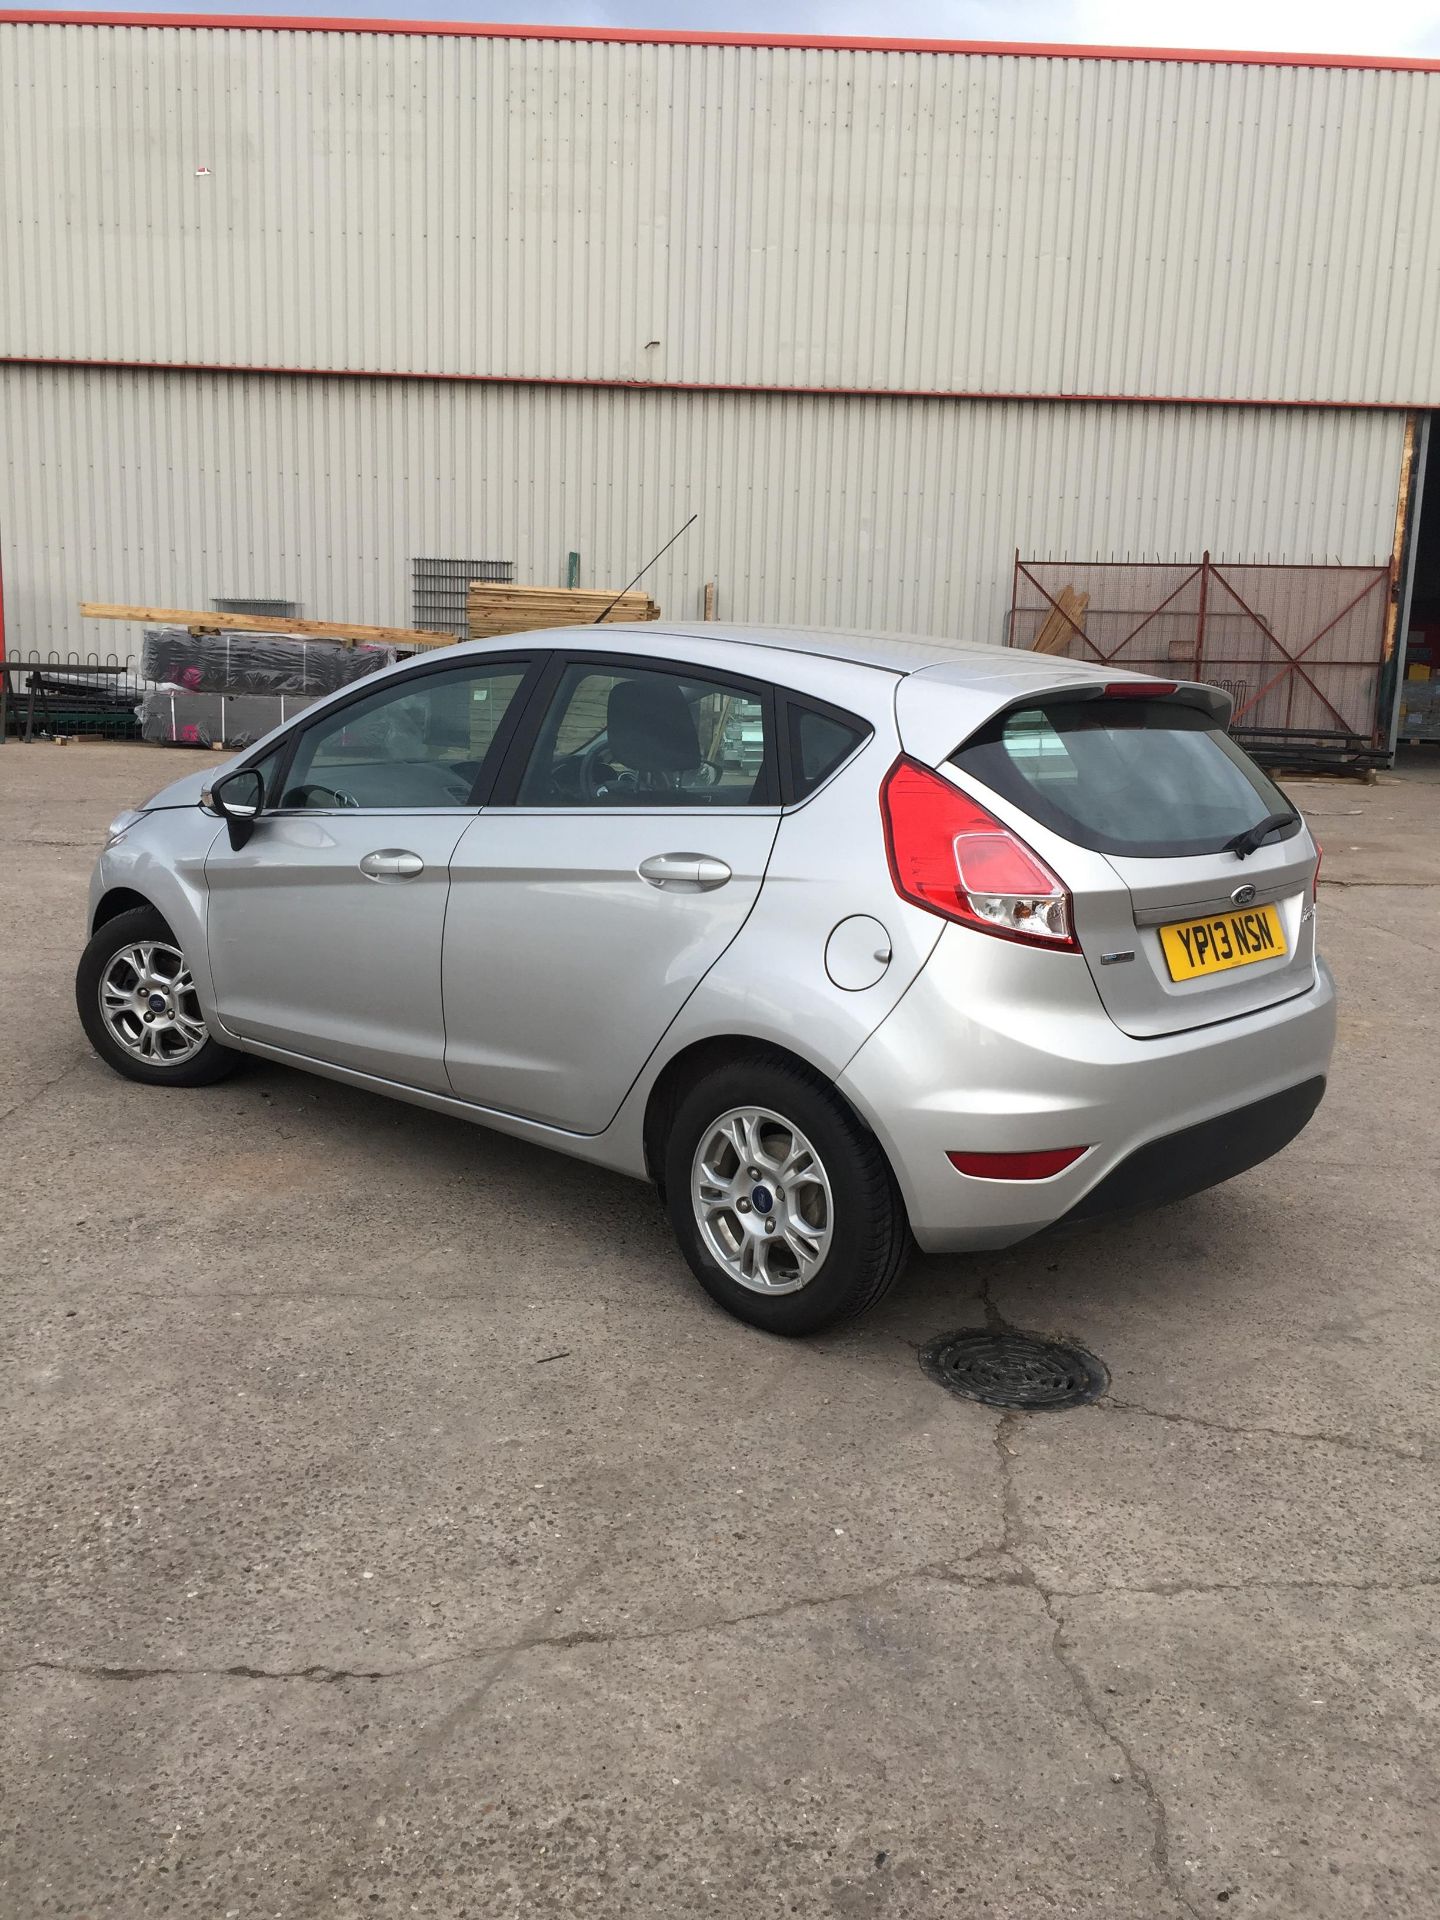 13 Plate FORD FIESTA ZETEC Econetic TDCI - YP13 NSN - Silver - 5 door hatchback - Tax expired 1st Fe - Image 5 of 15